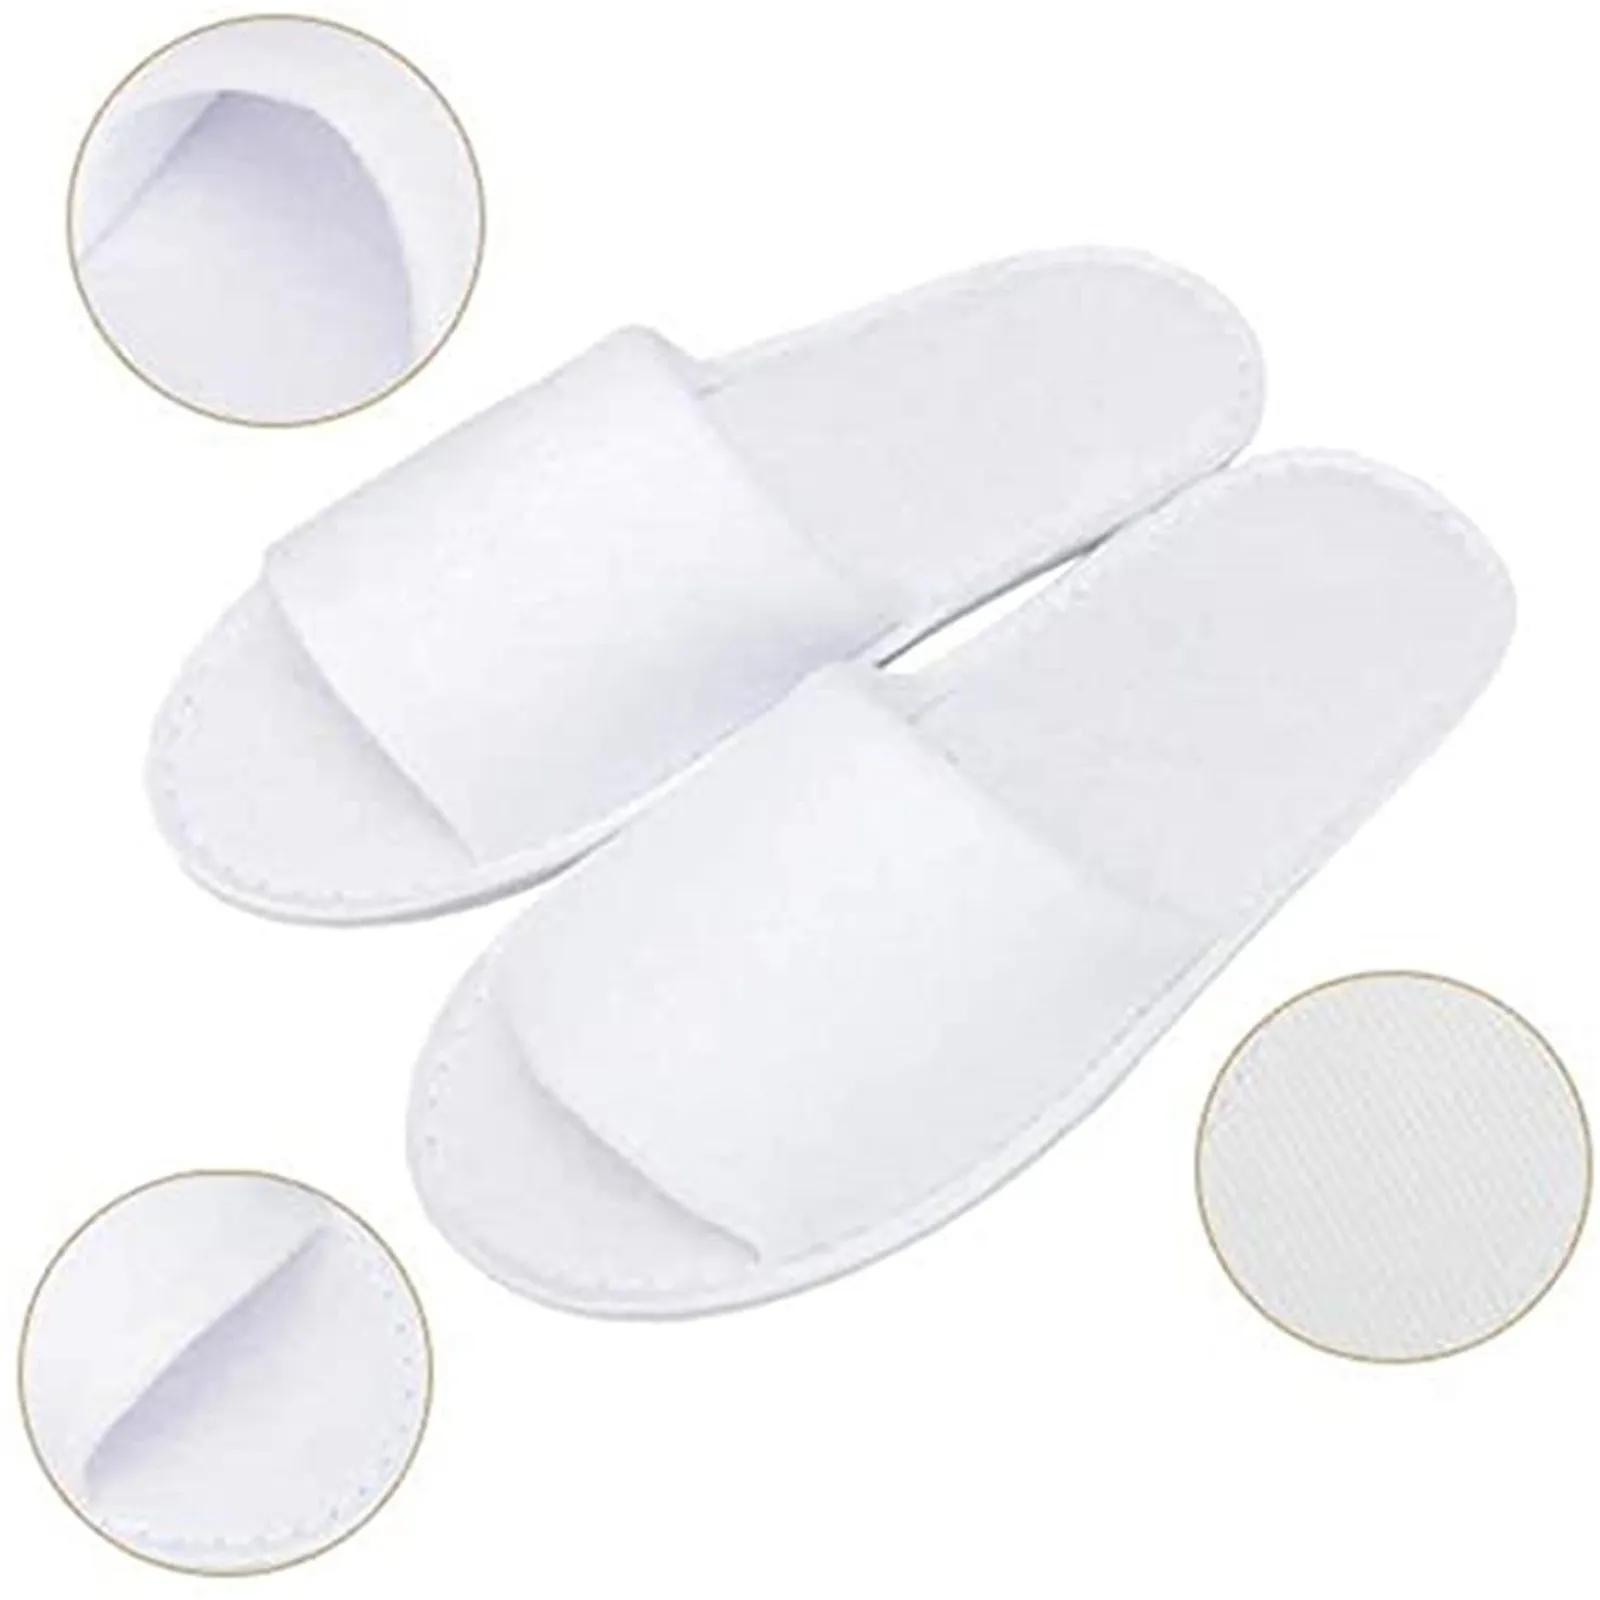 10 Pairs Spa Hotel Guest Comfort Slippers Closed Toe Disposable Terry Style New 